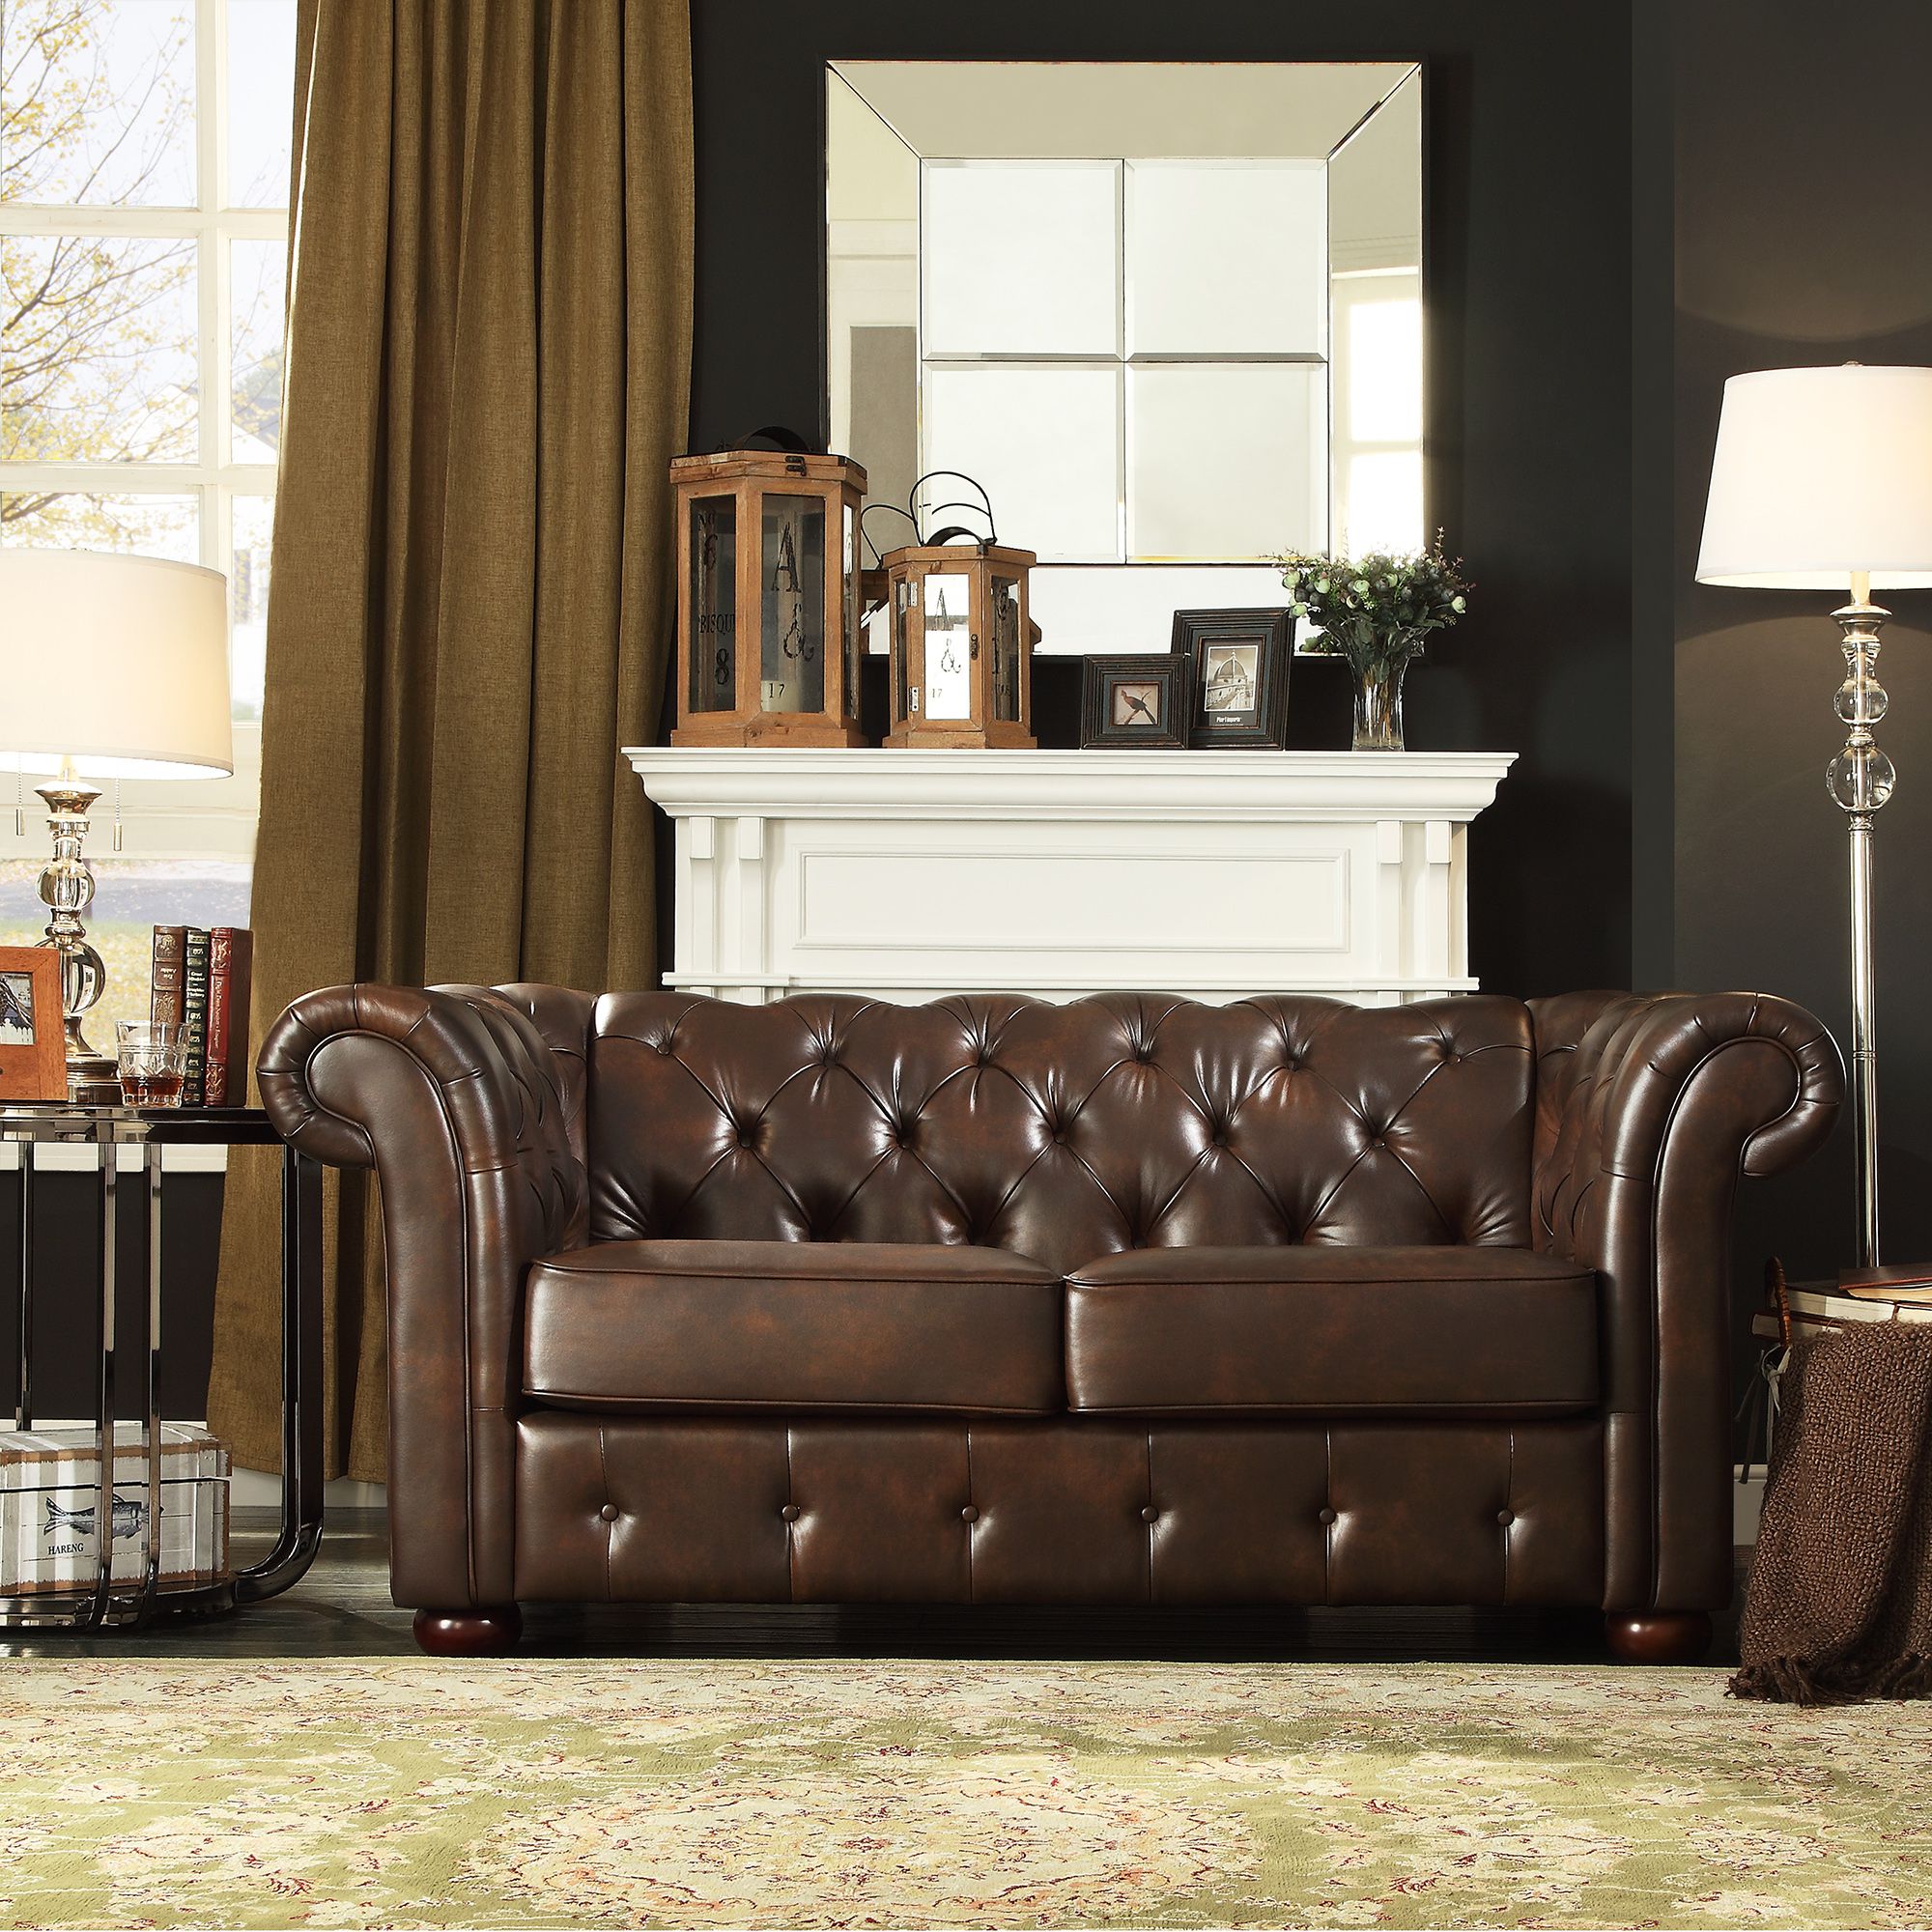 Moving on from faux leather is bonded leather. This image displays the Brown Bonded Leather Chesterfield Loveseat by iNSPIRE Q Artisan. In addition to the bonded leather upholstery, this piece also features button tufting and rolled arms to deliver a look of elegance.